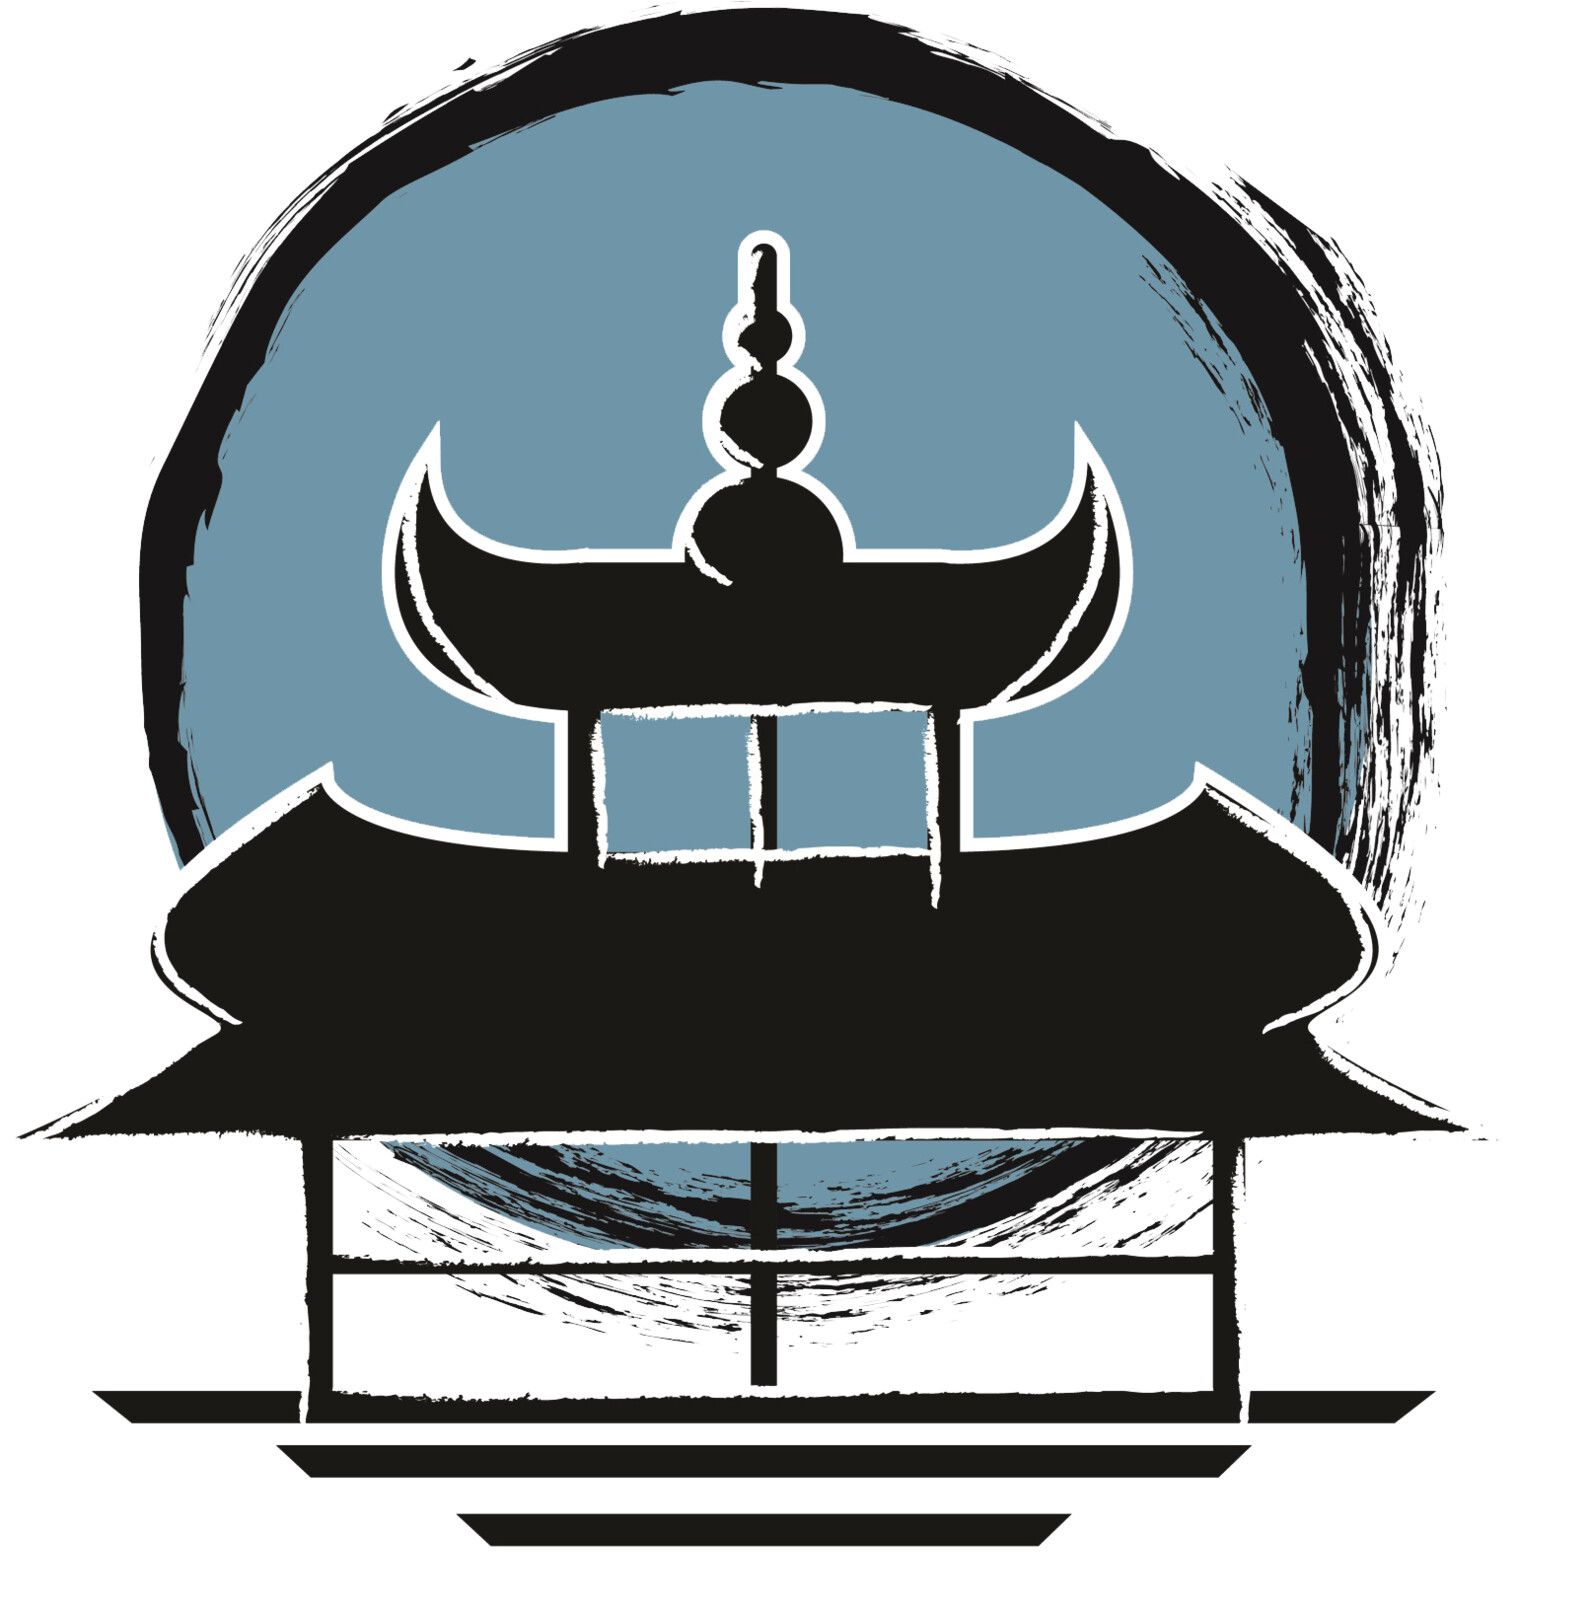 Old Gaming Dojo logo that was commissione